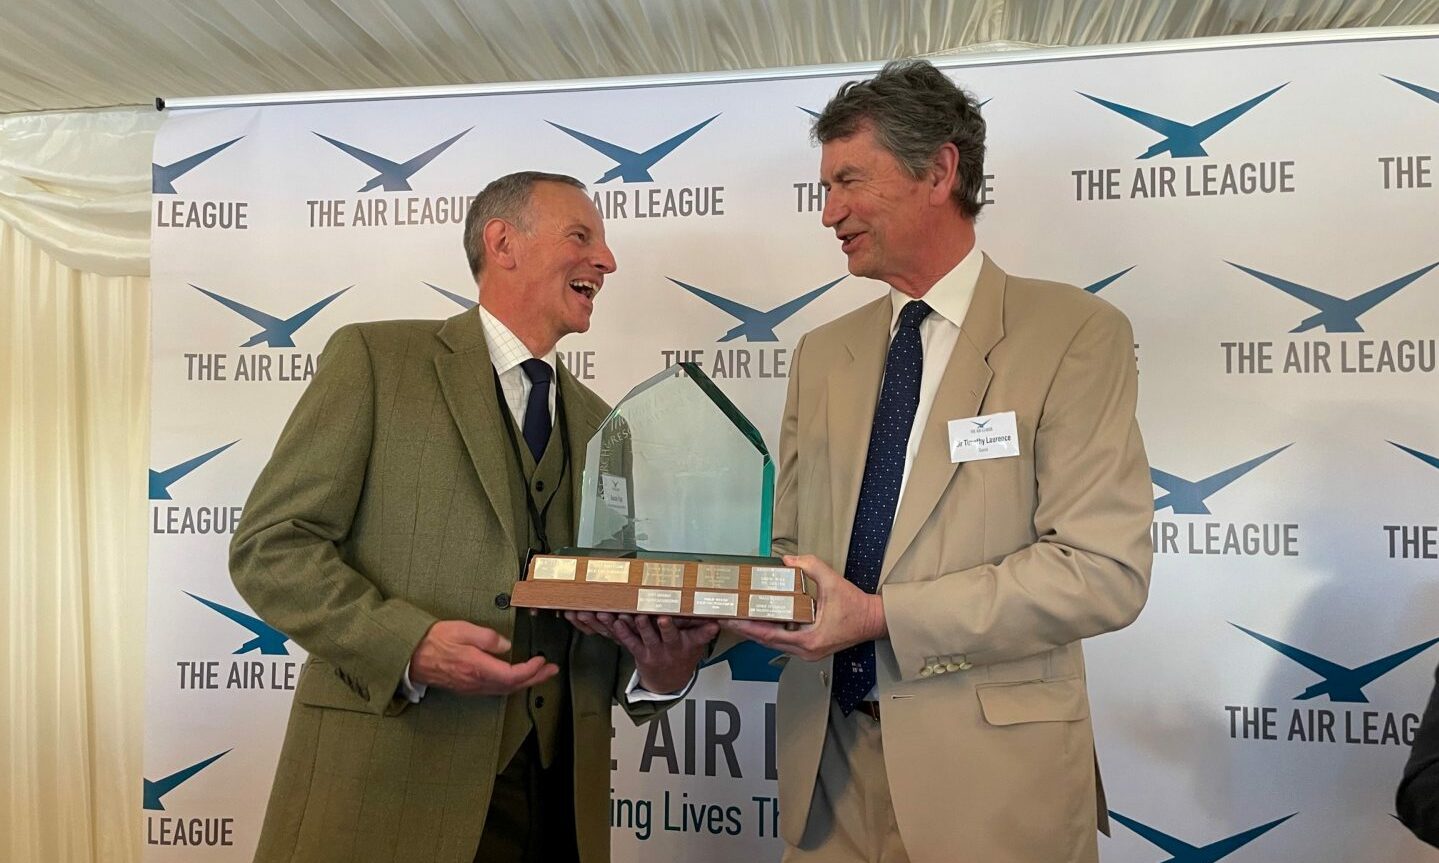 Duncan Tripp and Vice Admiral Sir Tim Laurence share a joke on stage as Mr Tripp is presented with his award at the House of Commons in London this week.